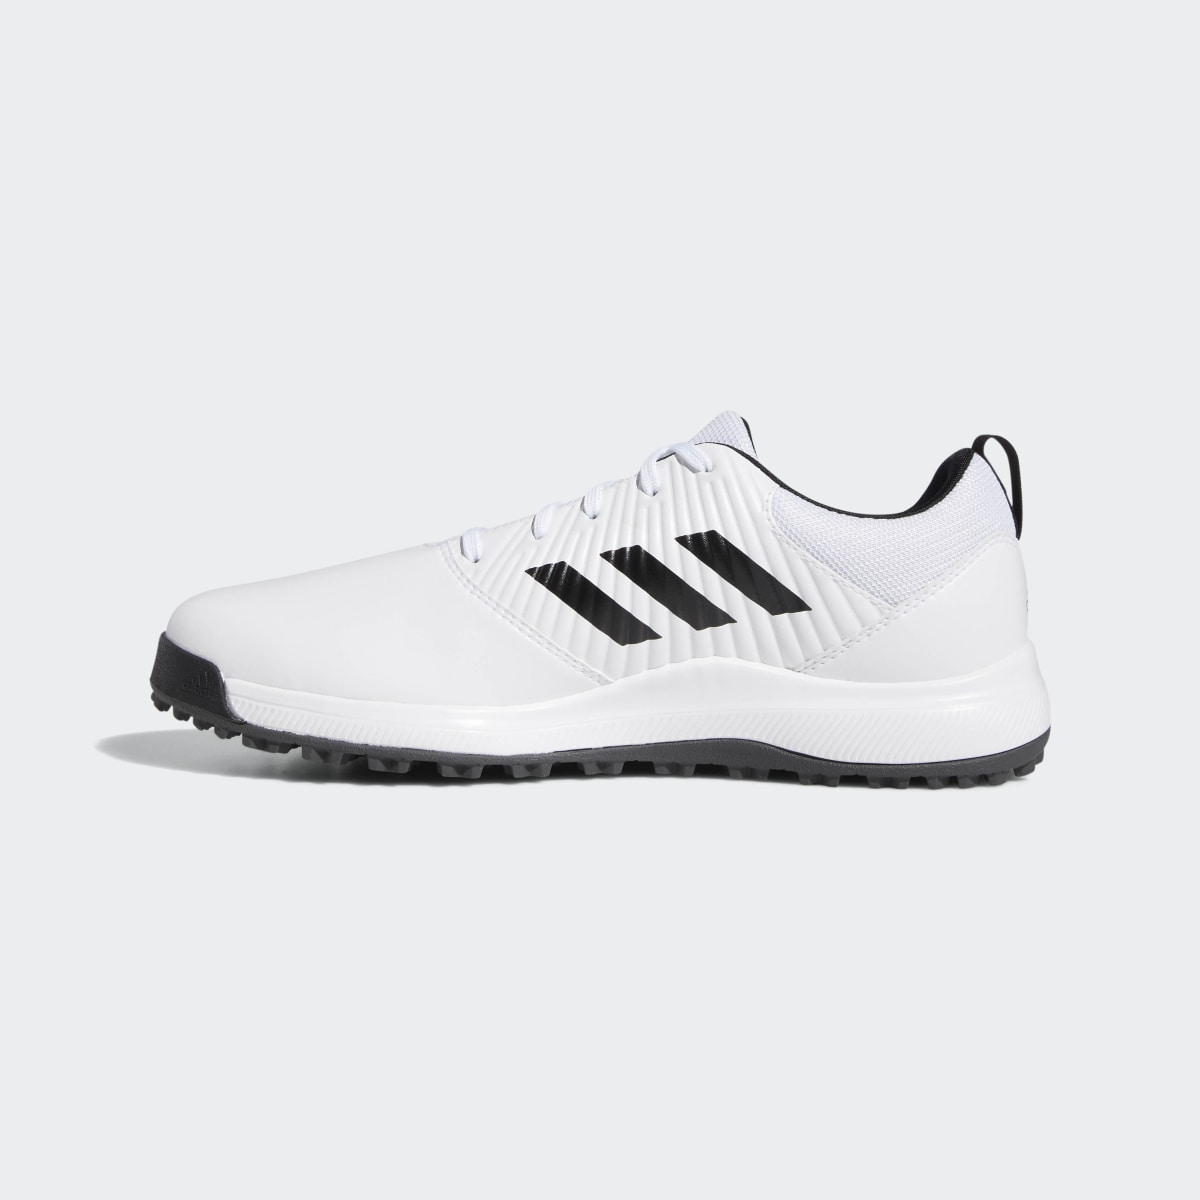 Adidas CP Traxion Spikeless Golf Shoes. 8